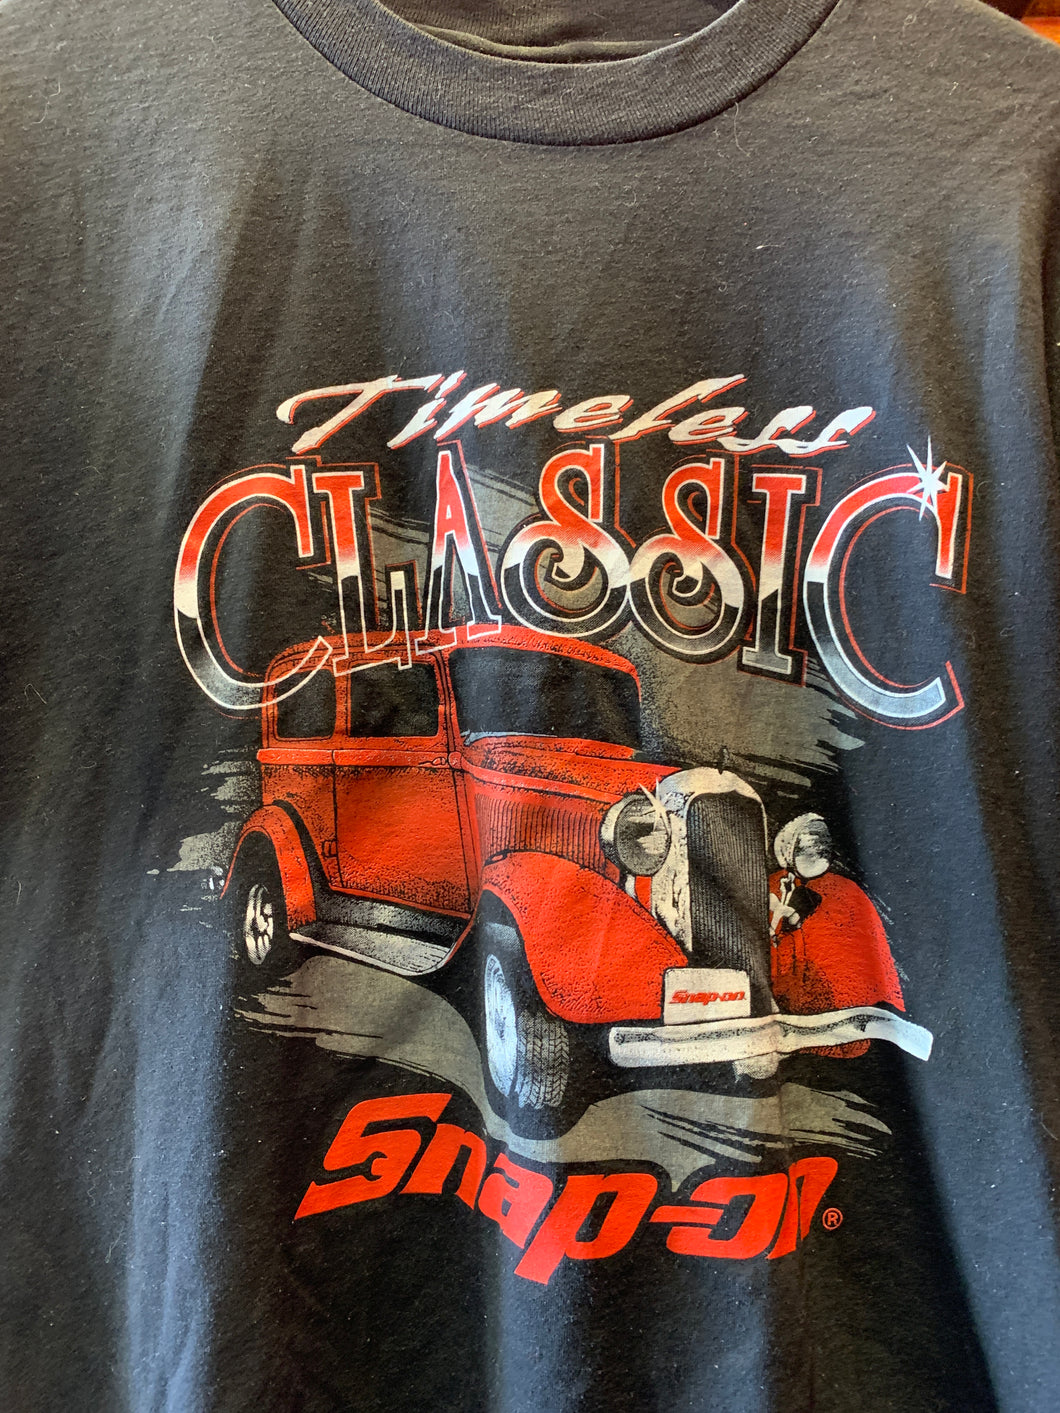 Vintage Timeless Classic Hot Rod, Large